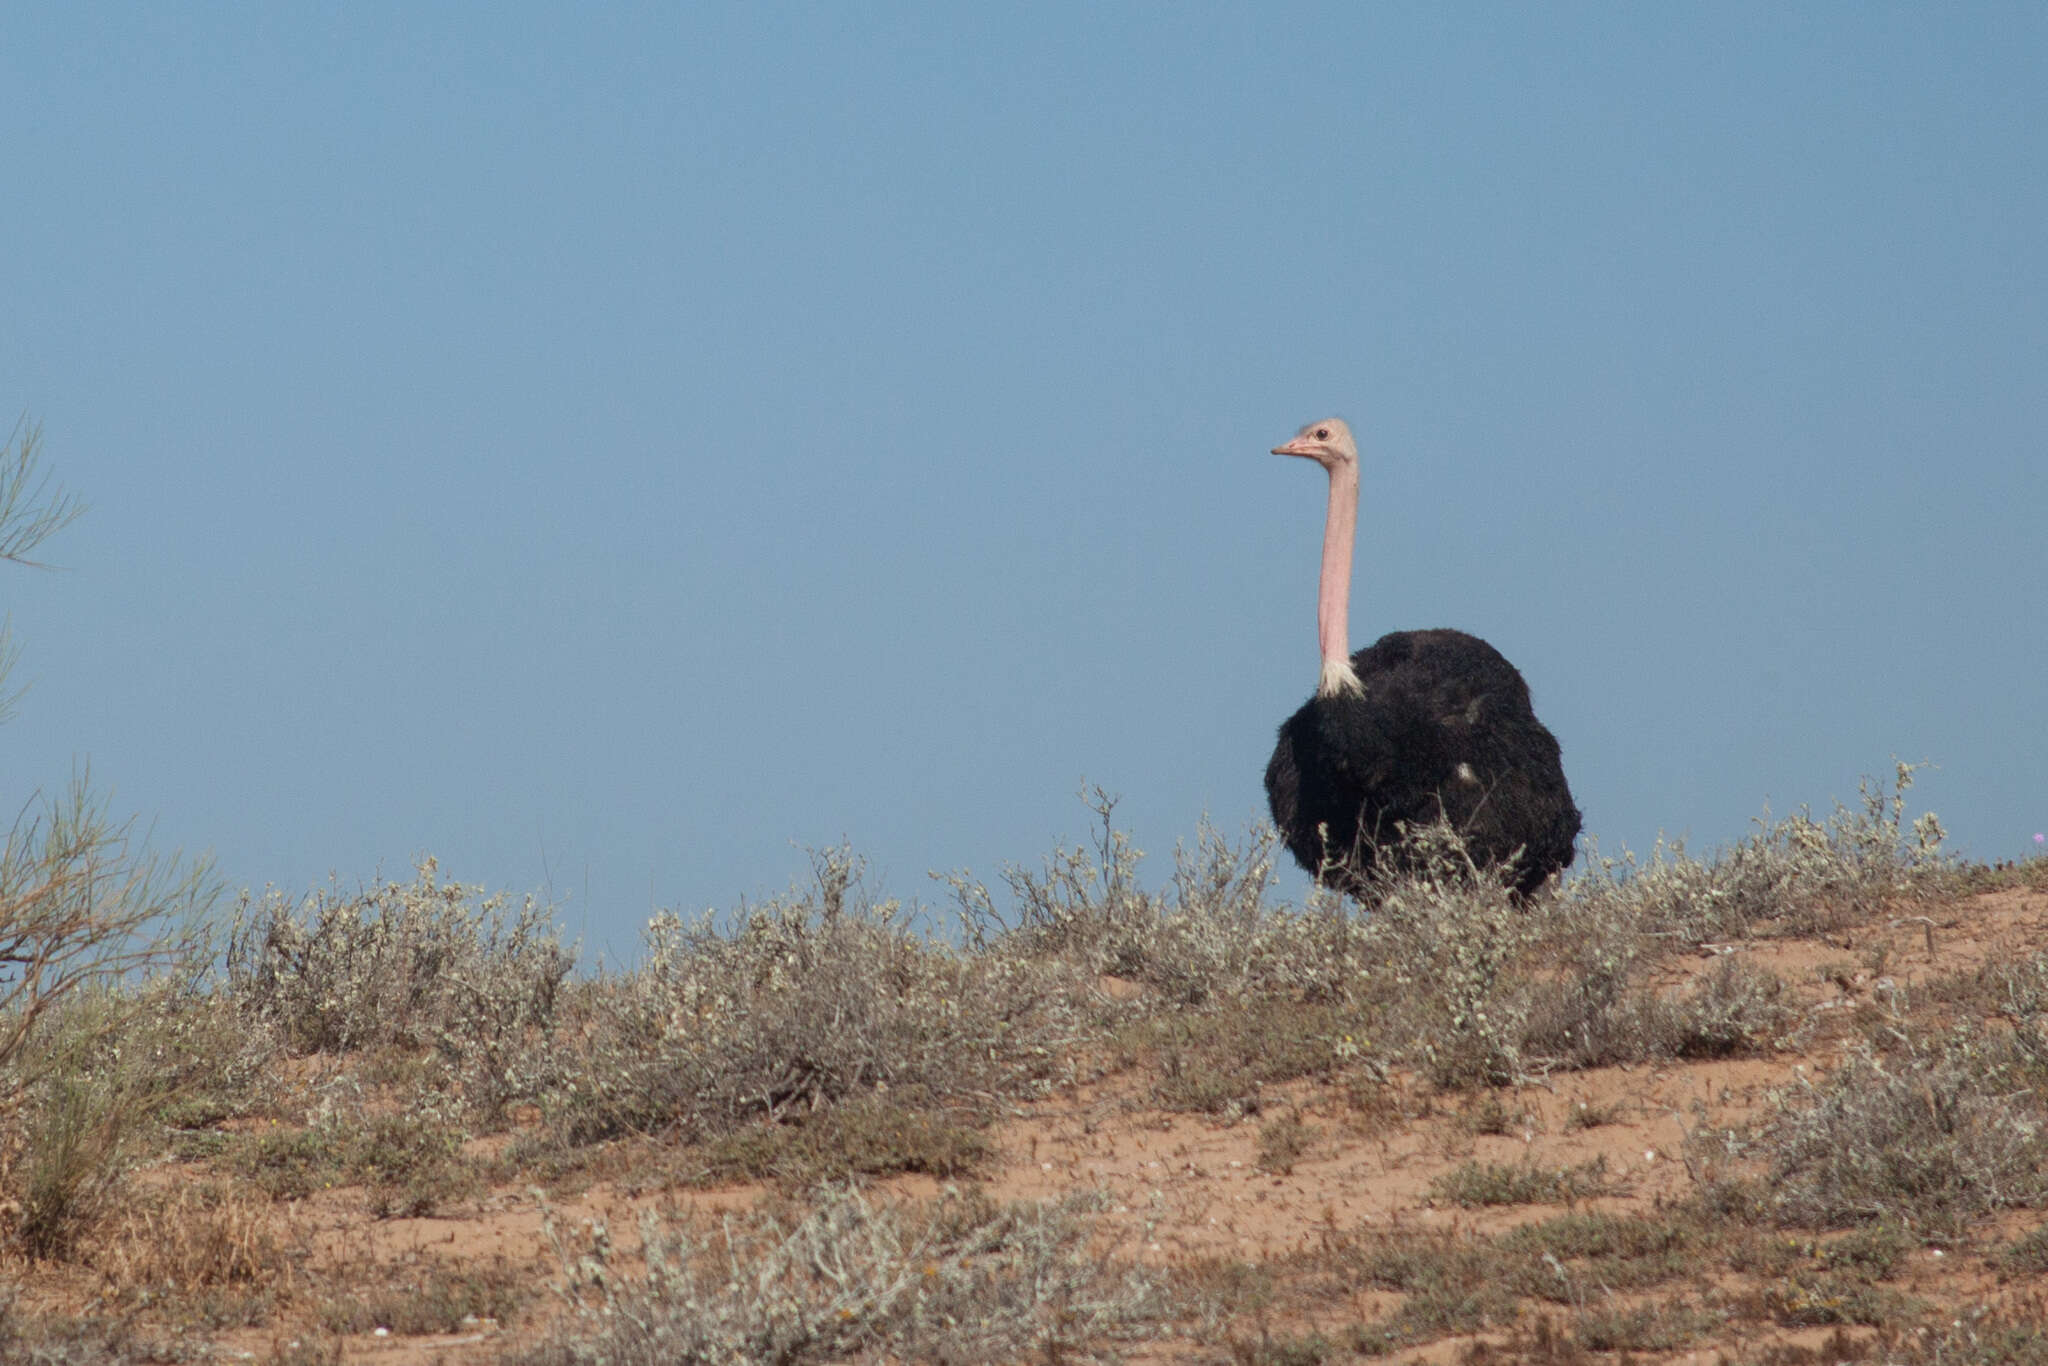 Image of North African ostrich